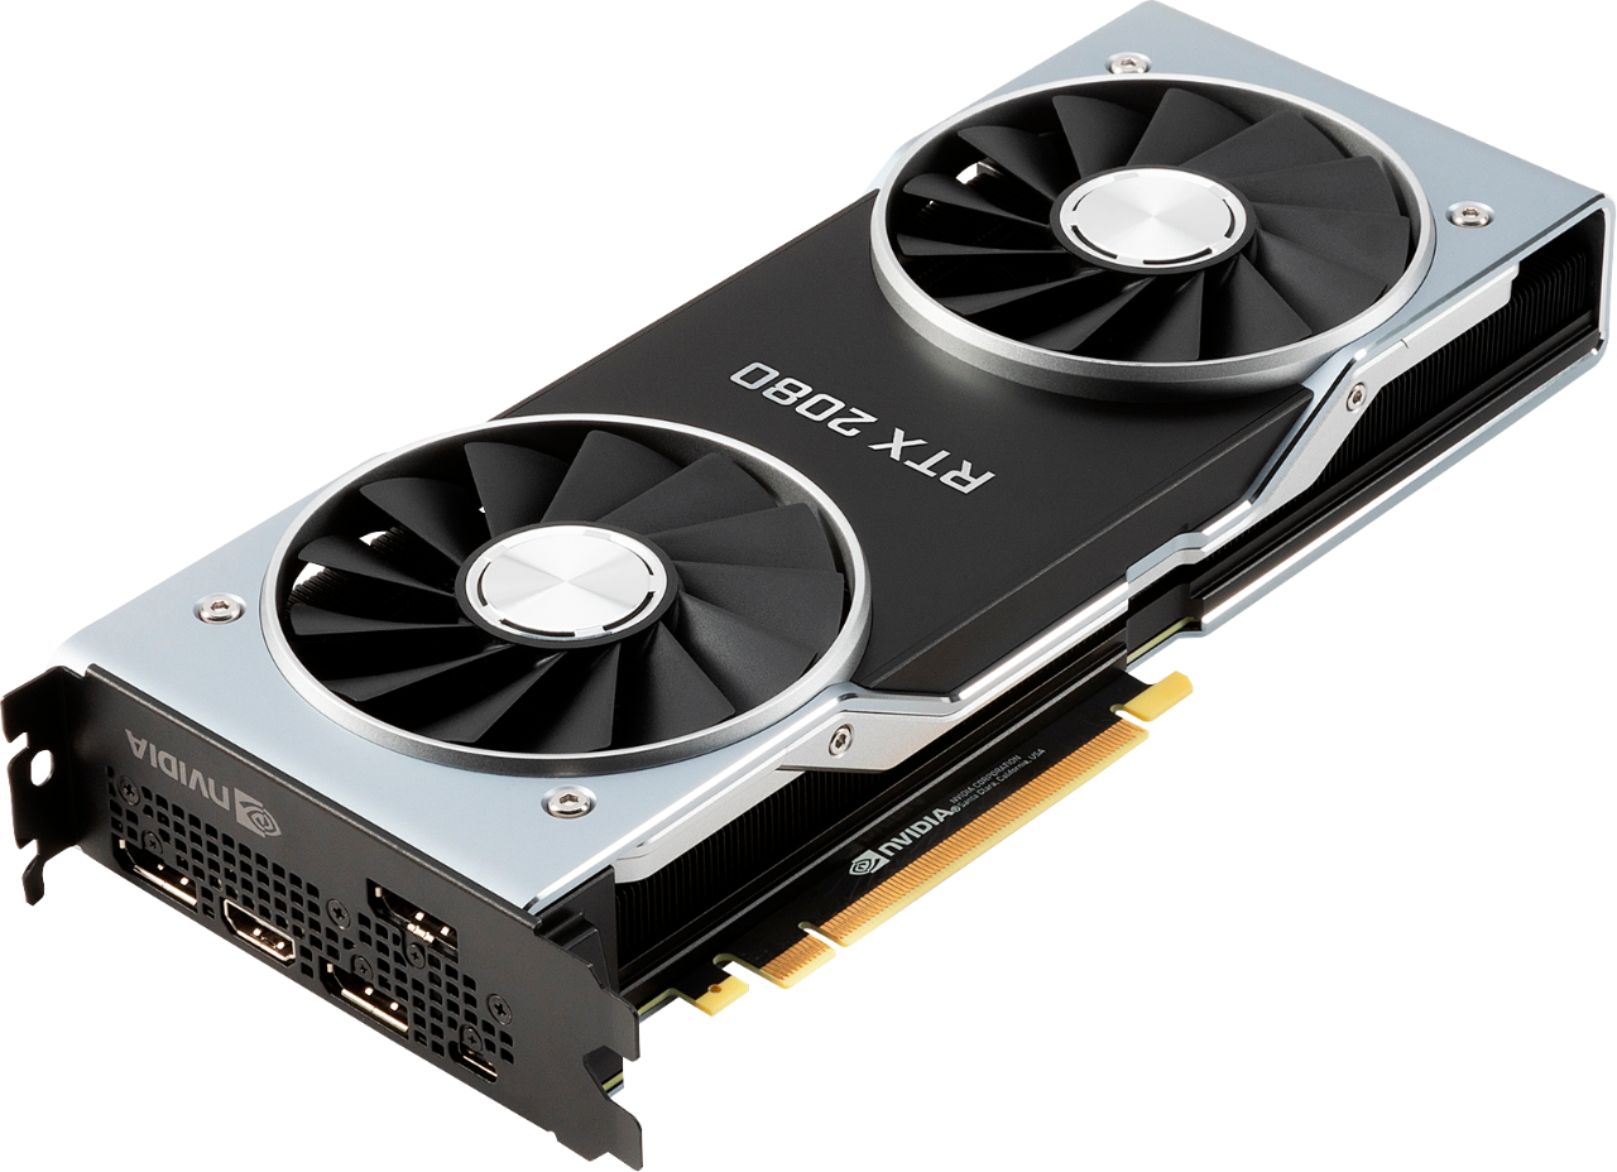 More GeForce RTX 2080 Ti and RTX 2080 in feed and planning, igorsLAB